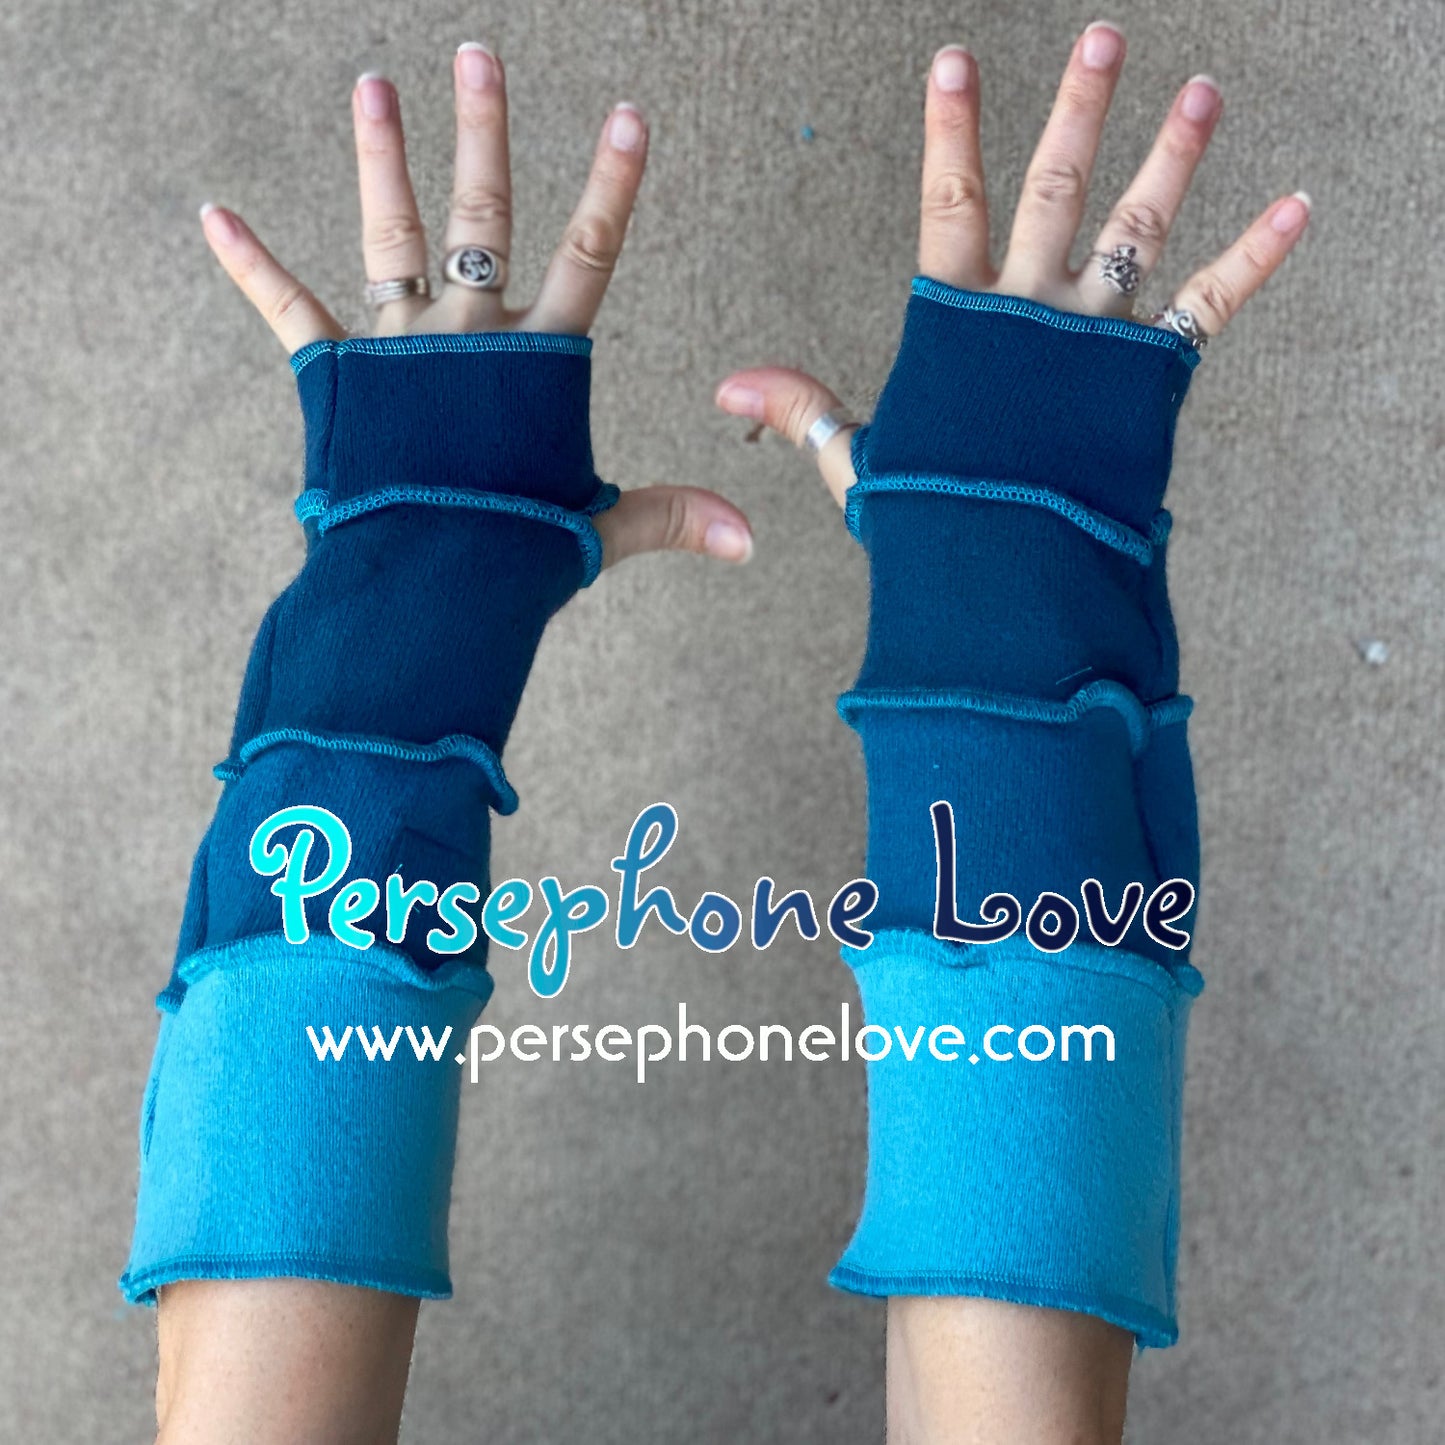 Katwise inspired needle-felted teal/turquoise 100% cashmere upcycled sweater arm warmers -1455